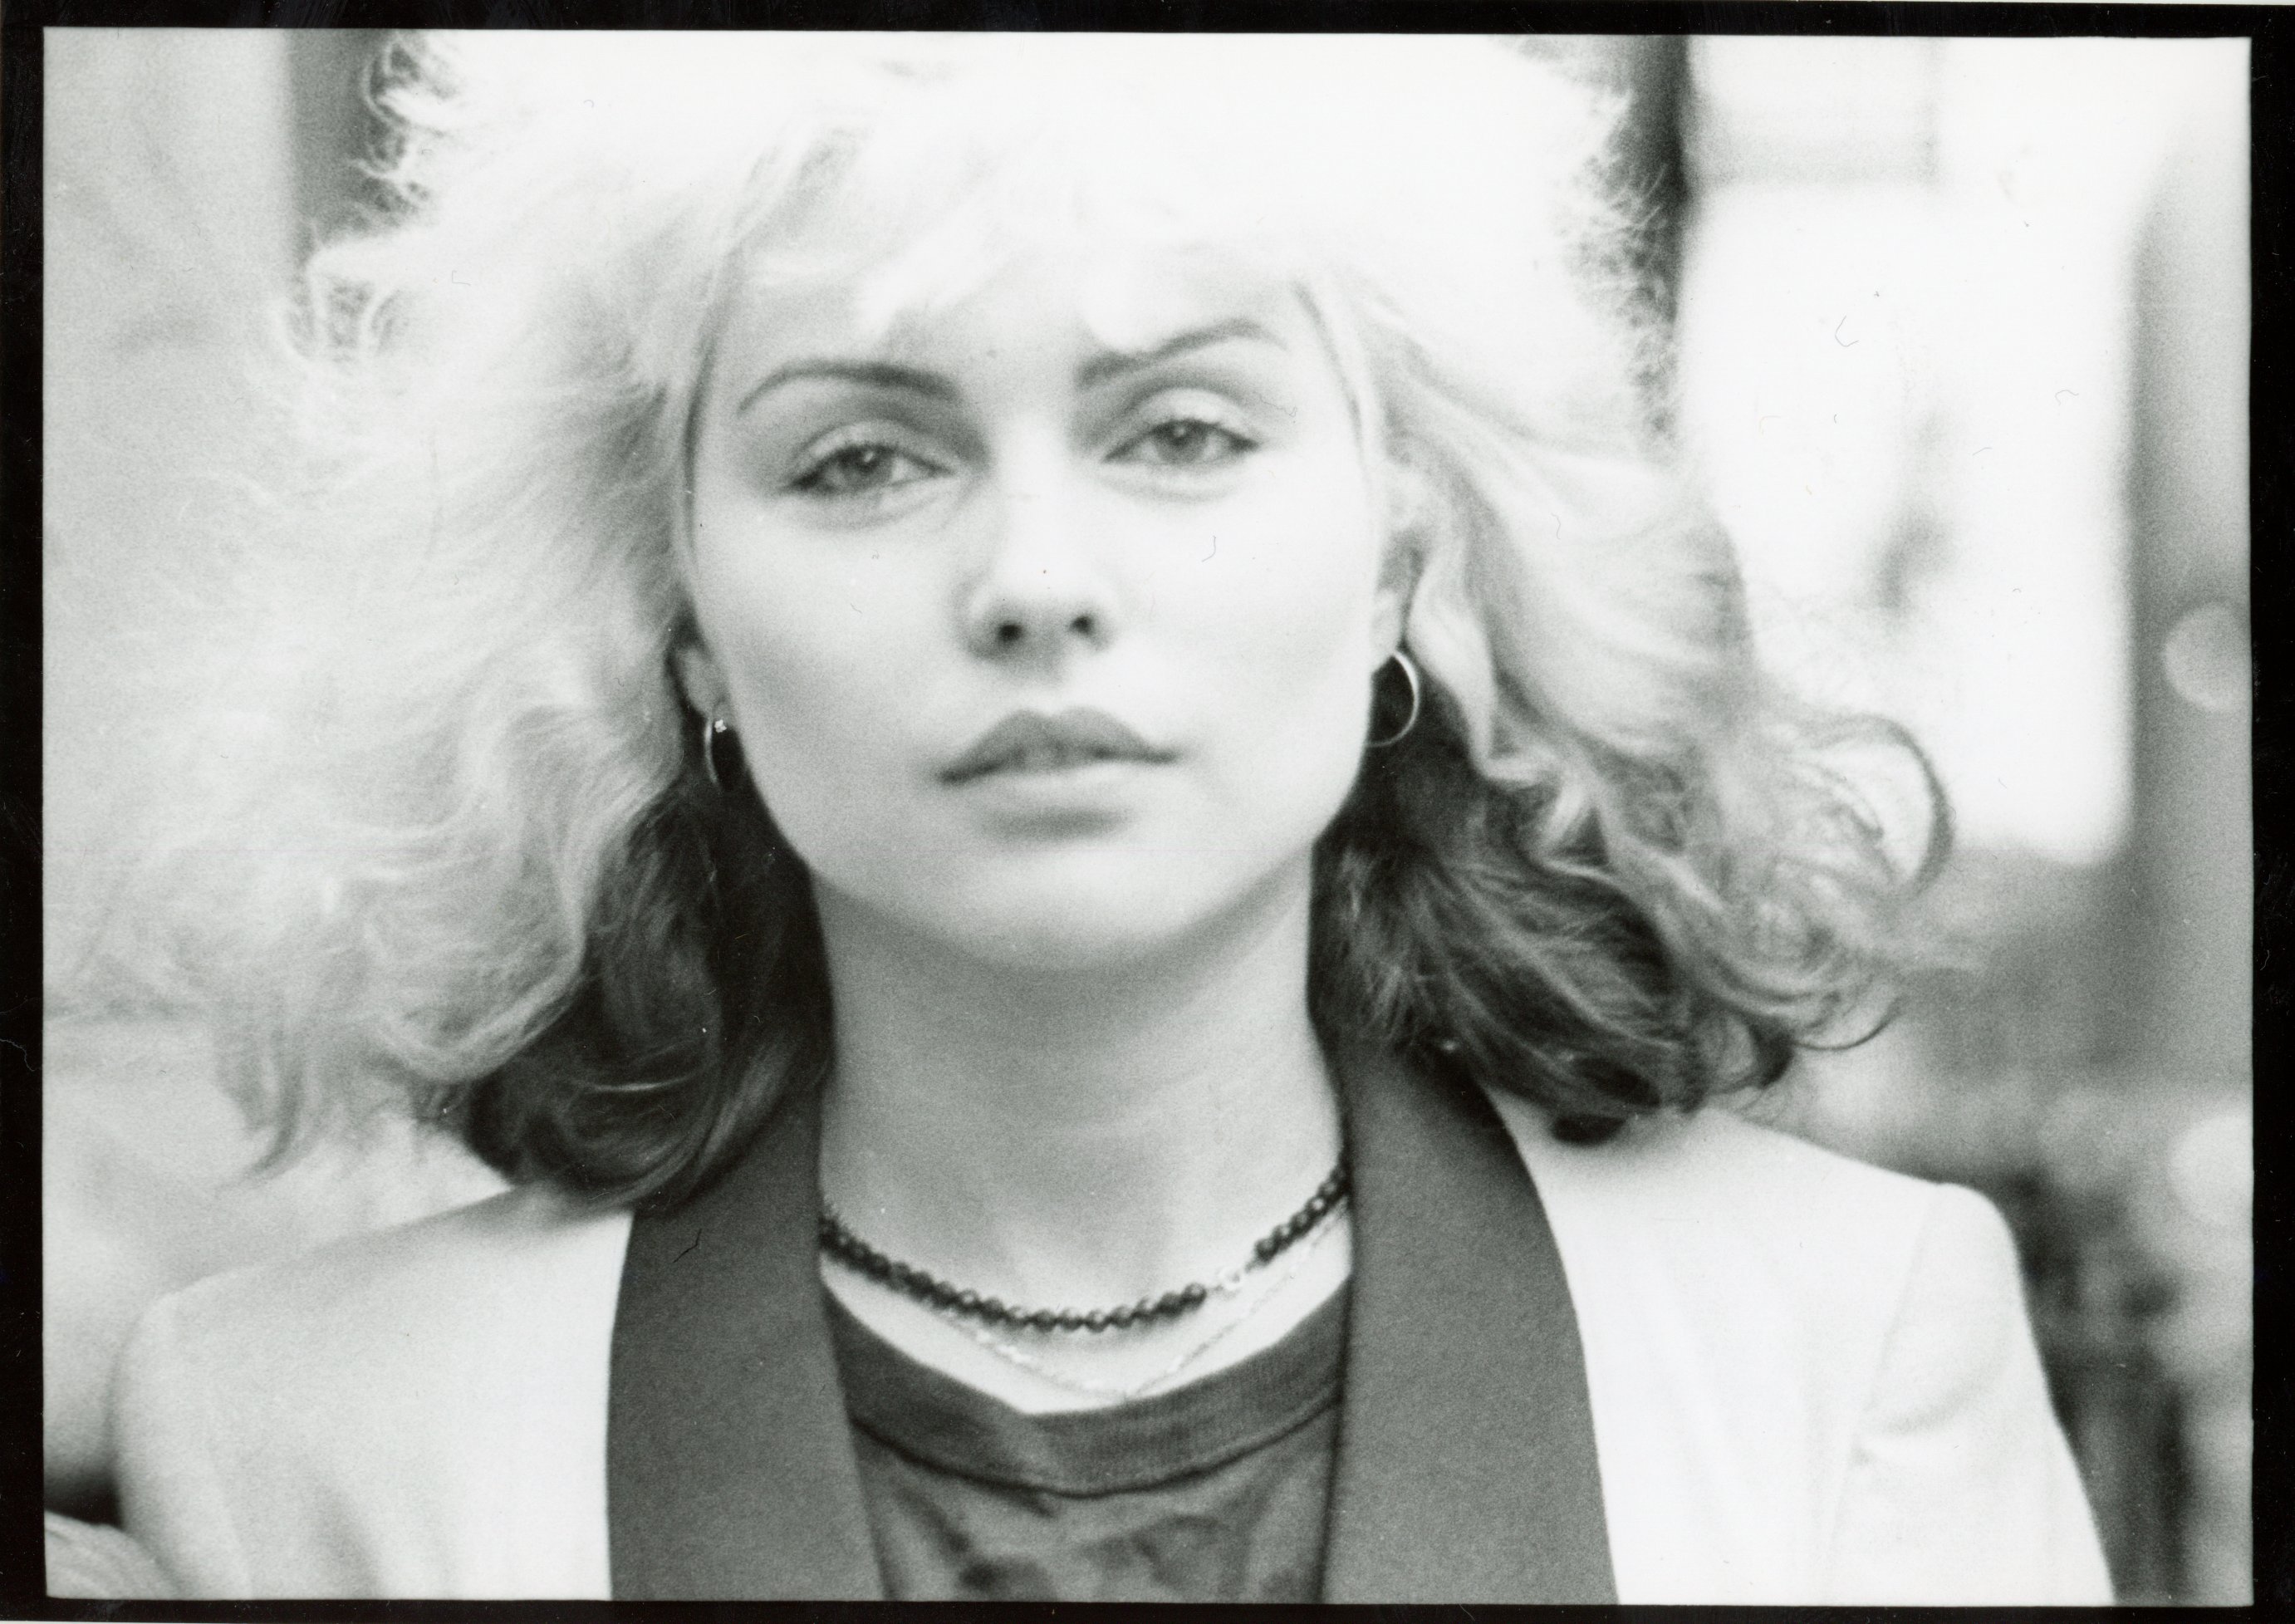 Gallery 98  Fernando Natalici, Debbie Harry in Portrait from Amos Poe's  The Foreigner, SIGNED by Natalici, Photograph, 1977